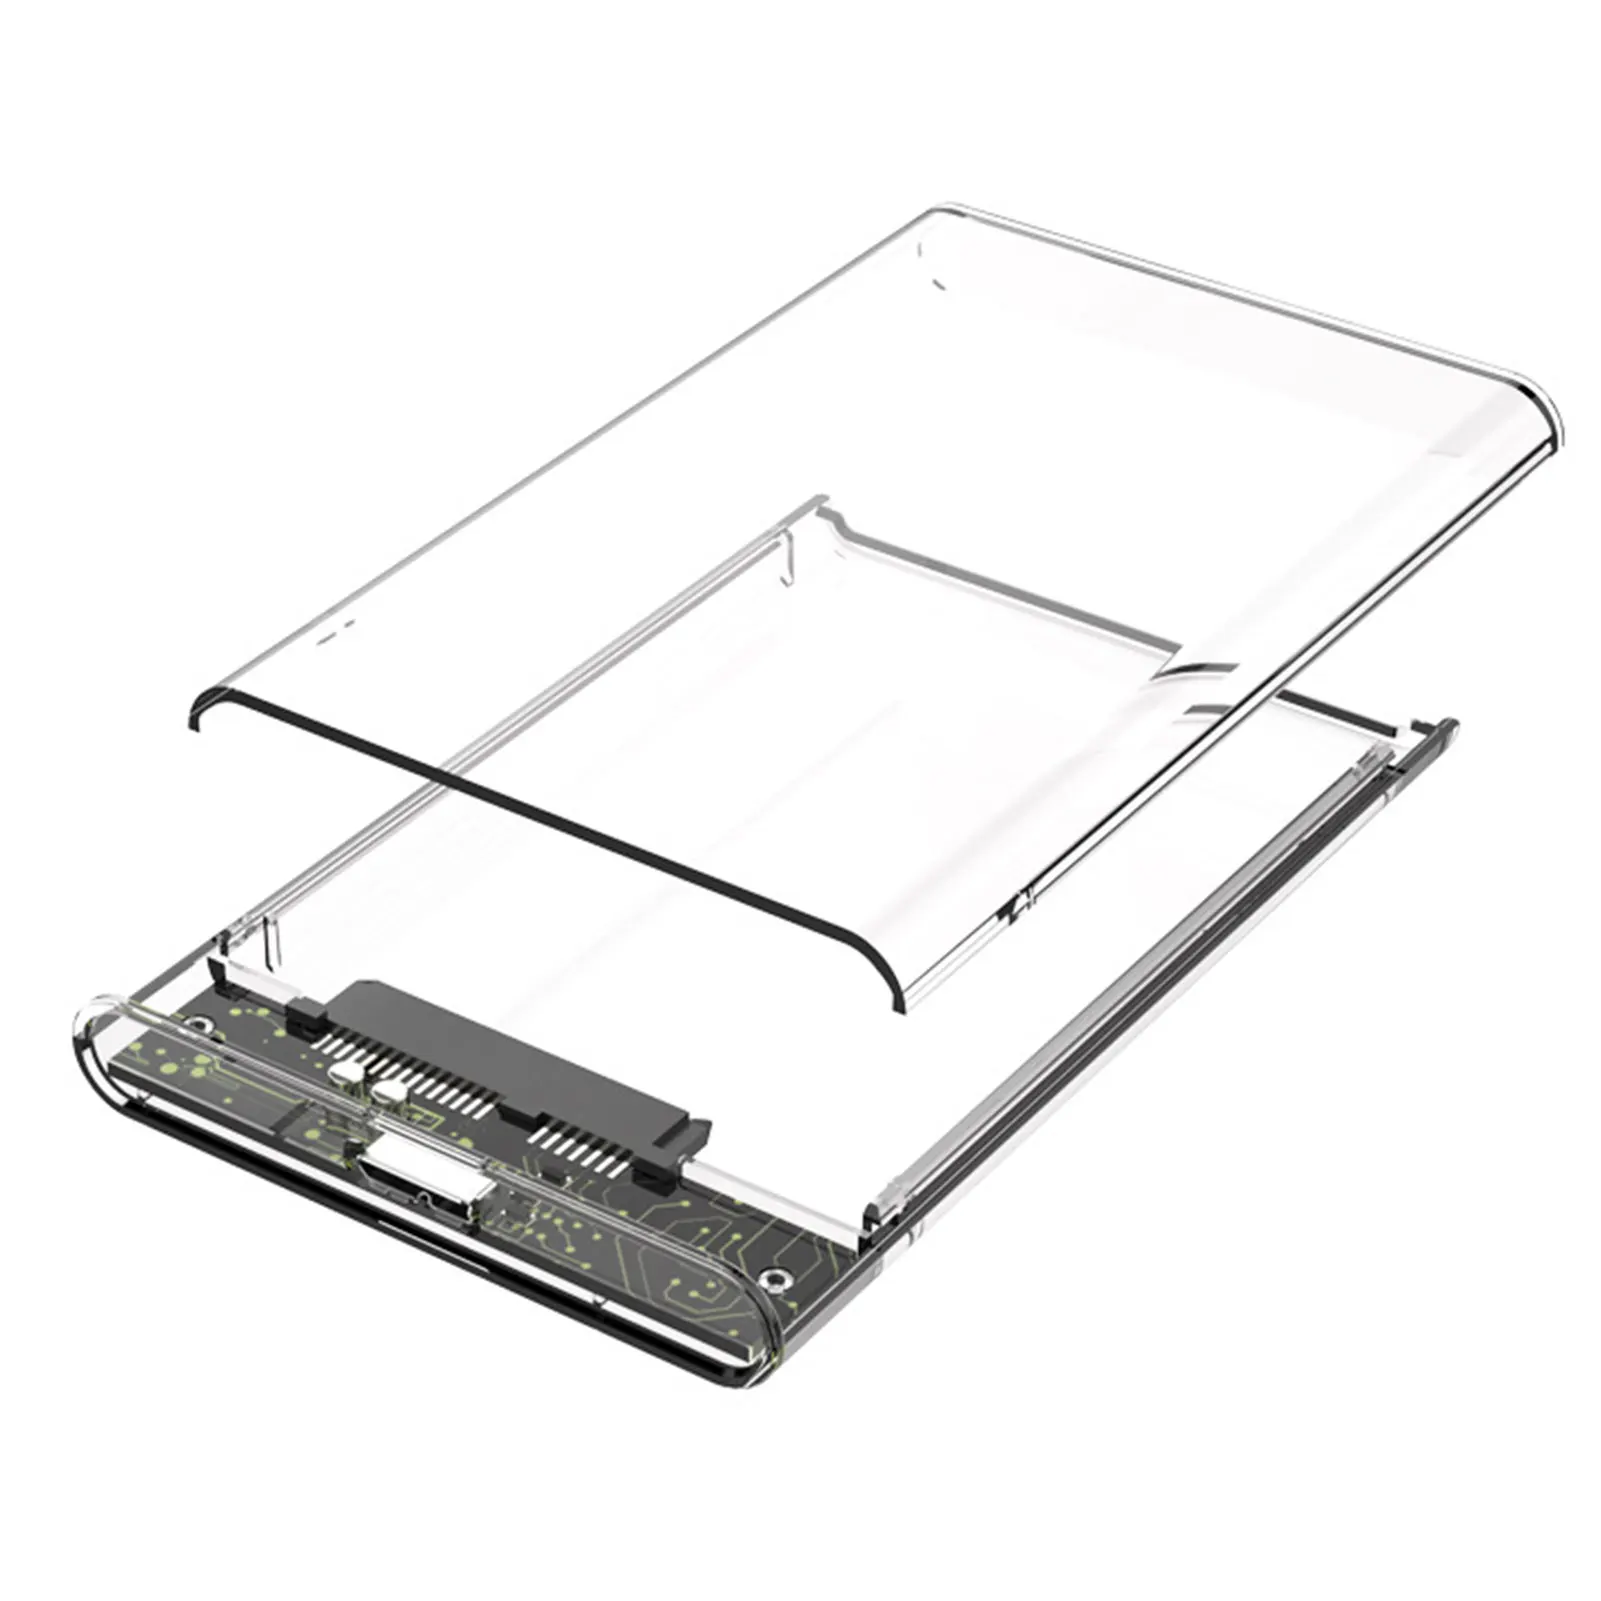 USB 3.0 External Hard Drive Enclosure Portable Clear Hard Disk Case For 2.5inch 7mm/9.5mm HDD SSD Support 2TB Drives Tool-Free